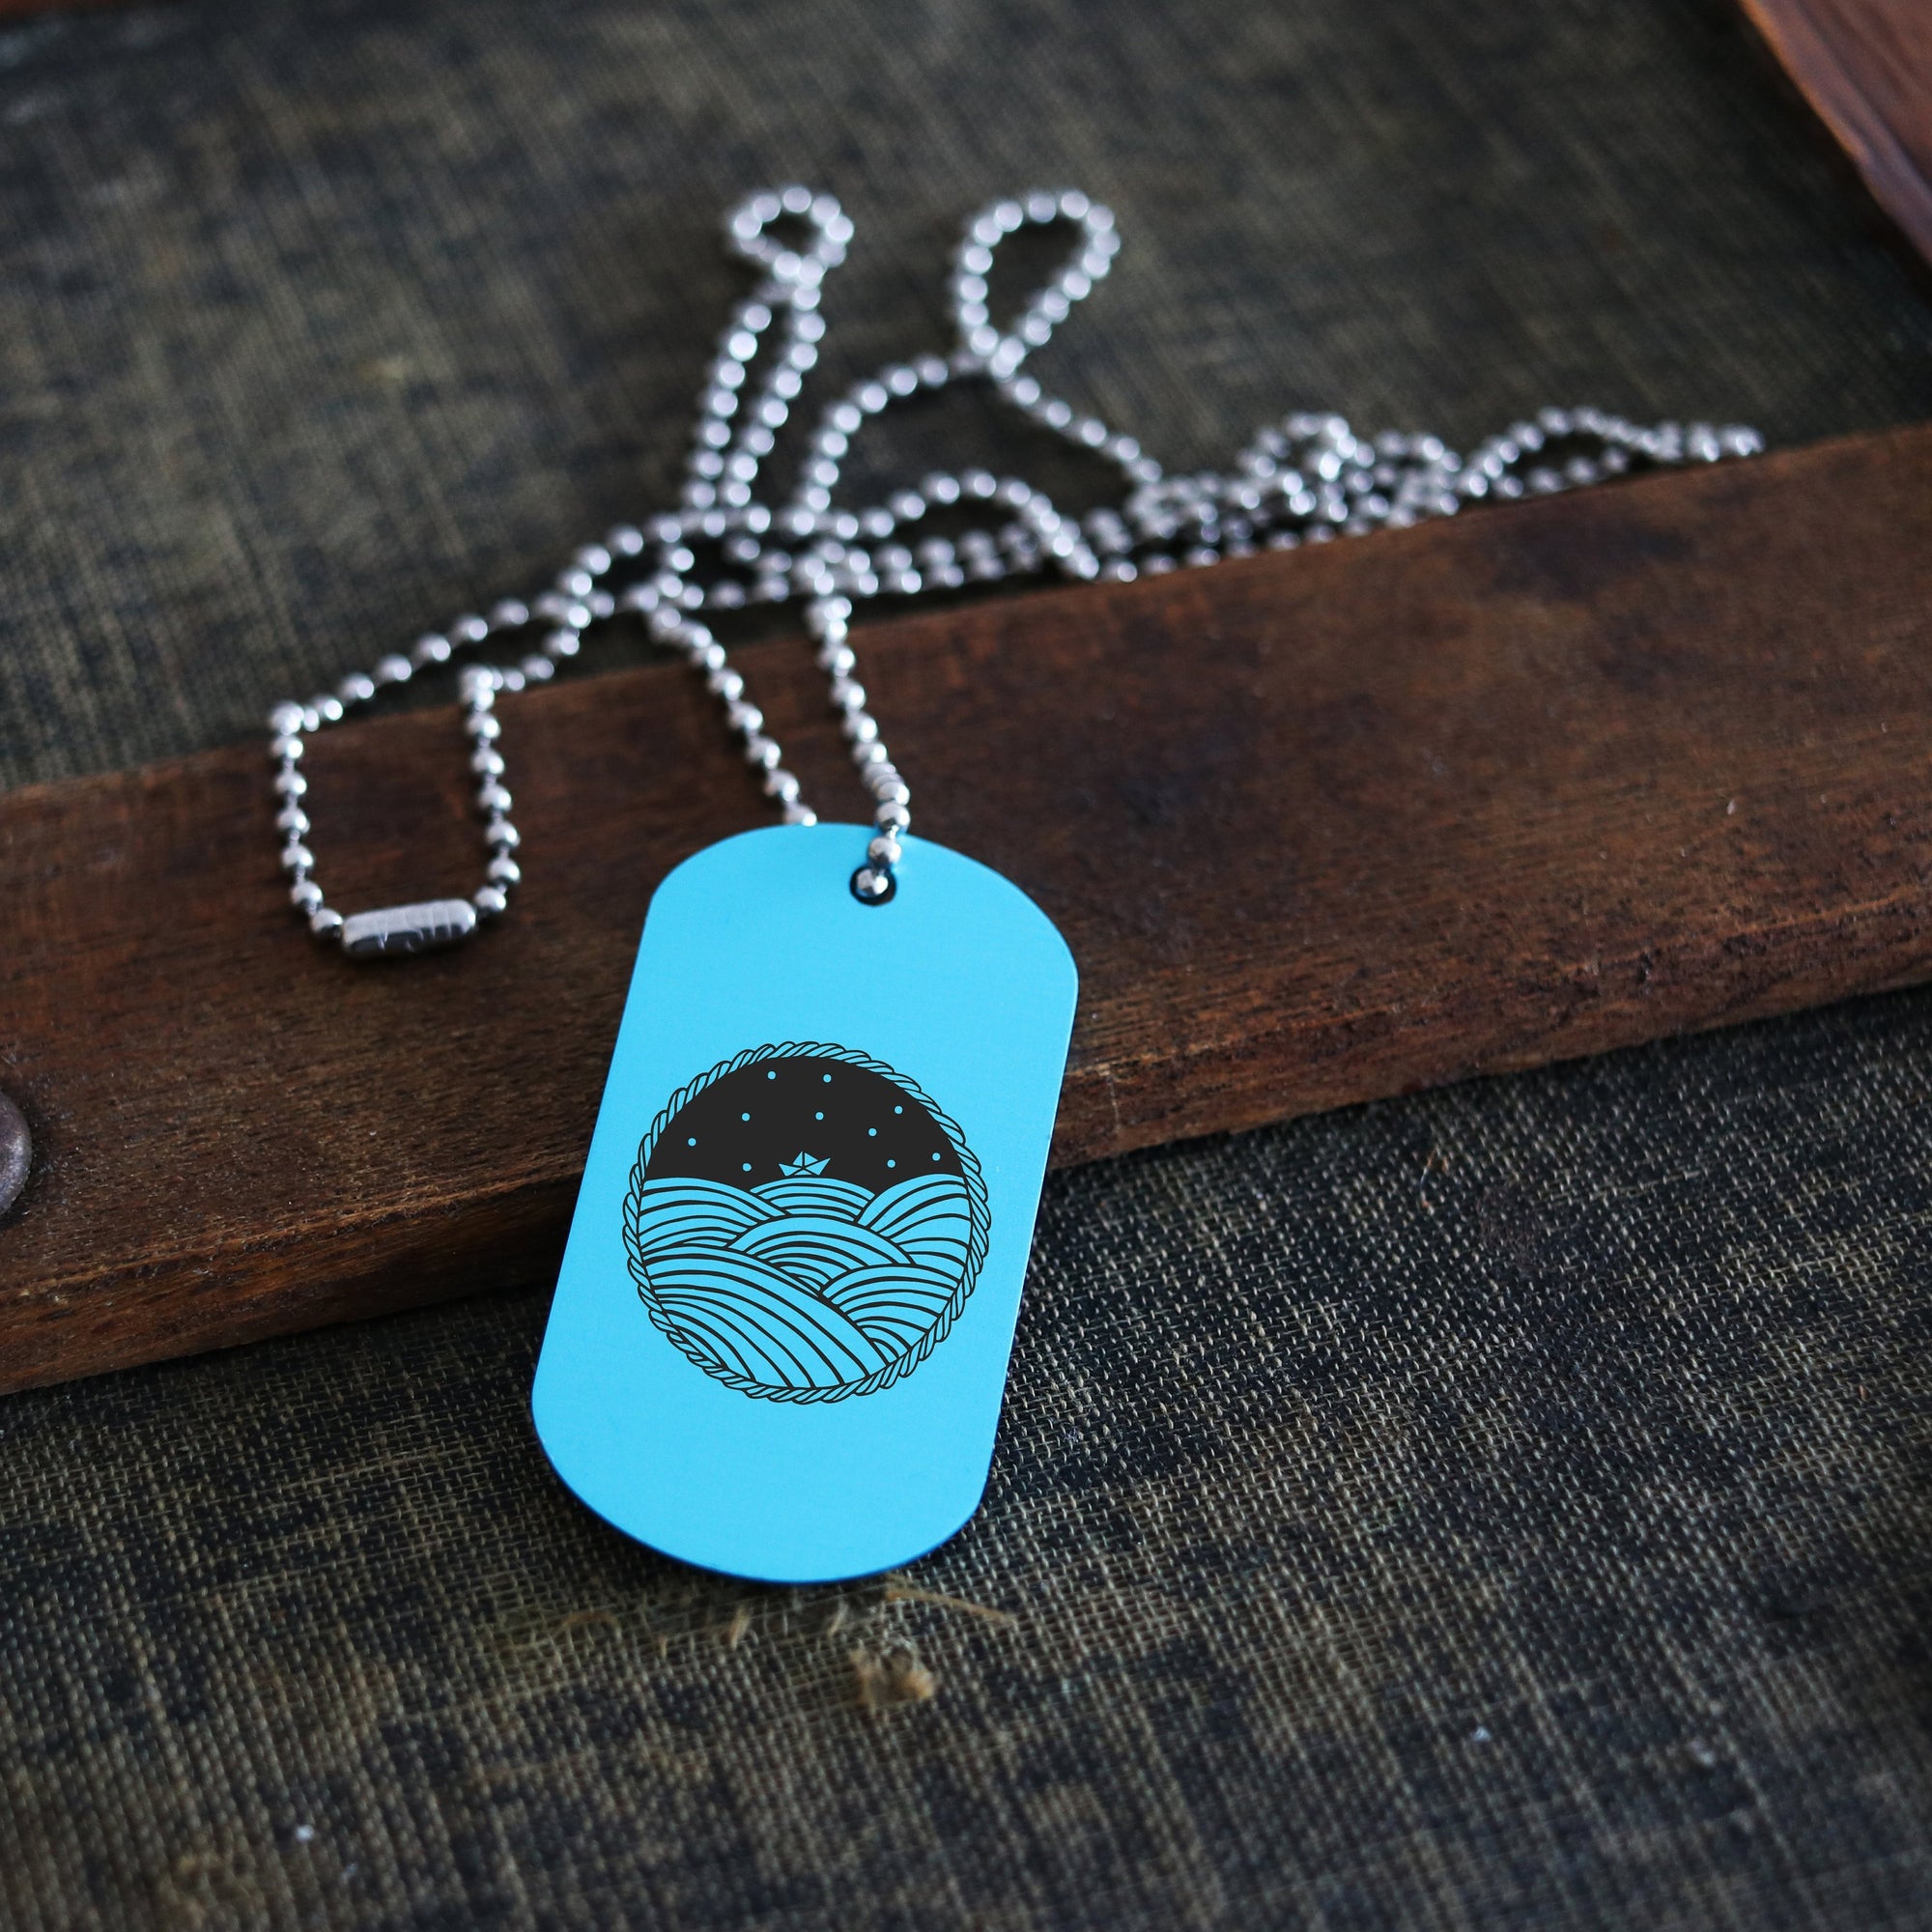 Laser Engraved Men's Dog Tag, Wedding Gift, Nautical Sailboat, Gifts For Him, Personalized Necklace, Custom Keychain, Key Chain, LGC10478